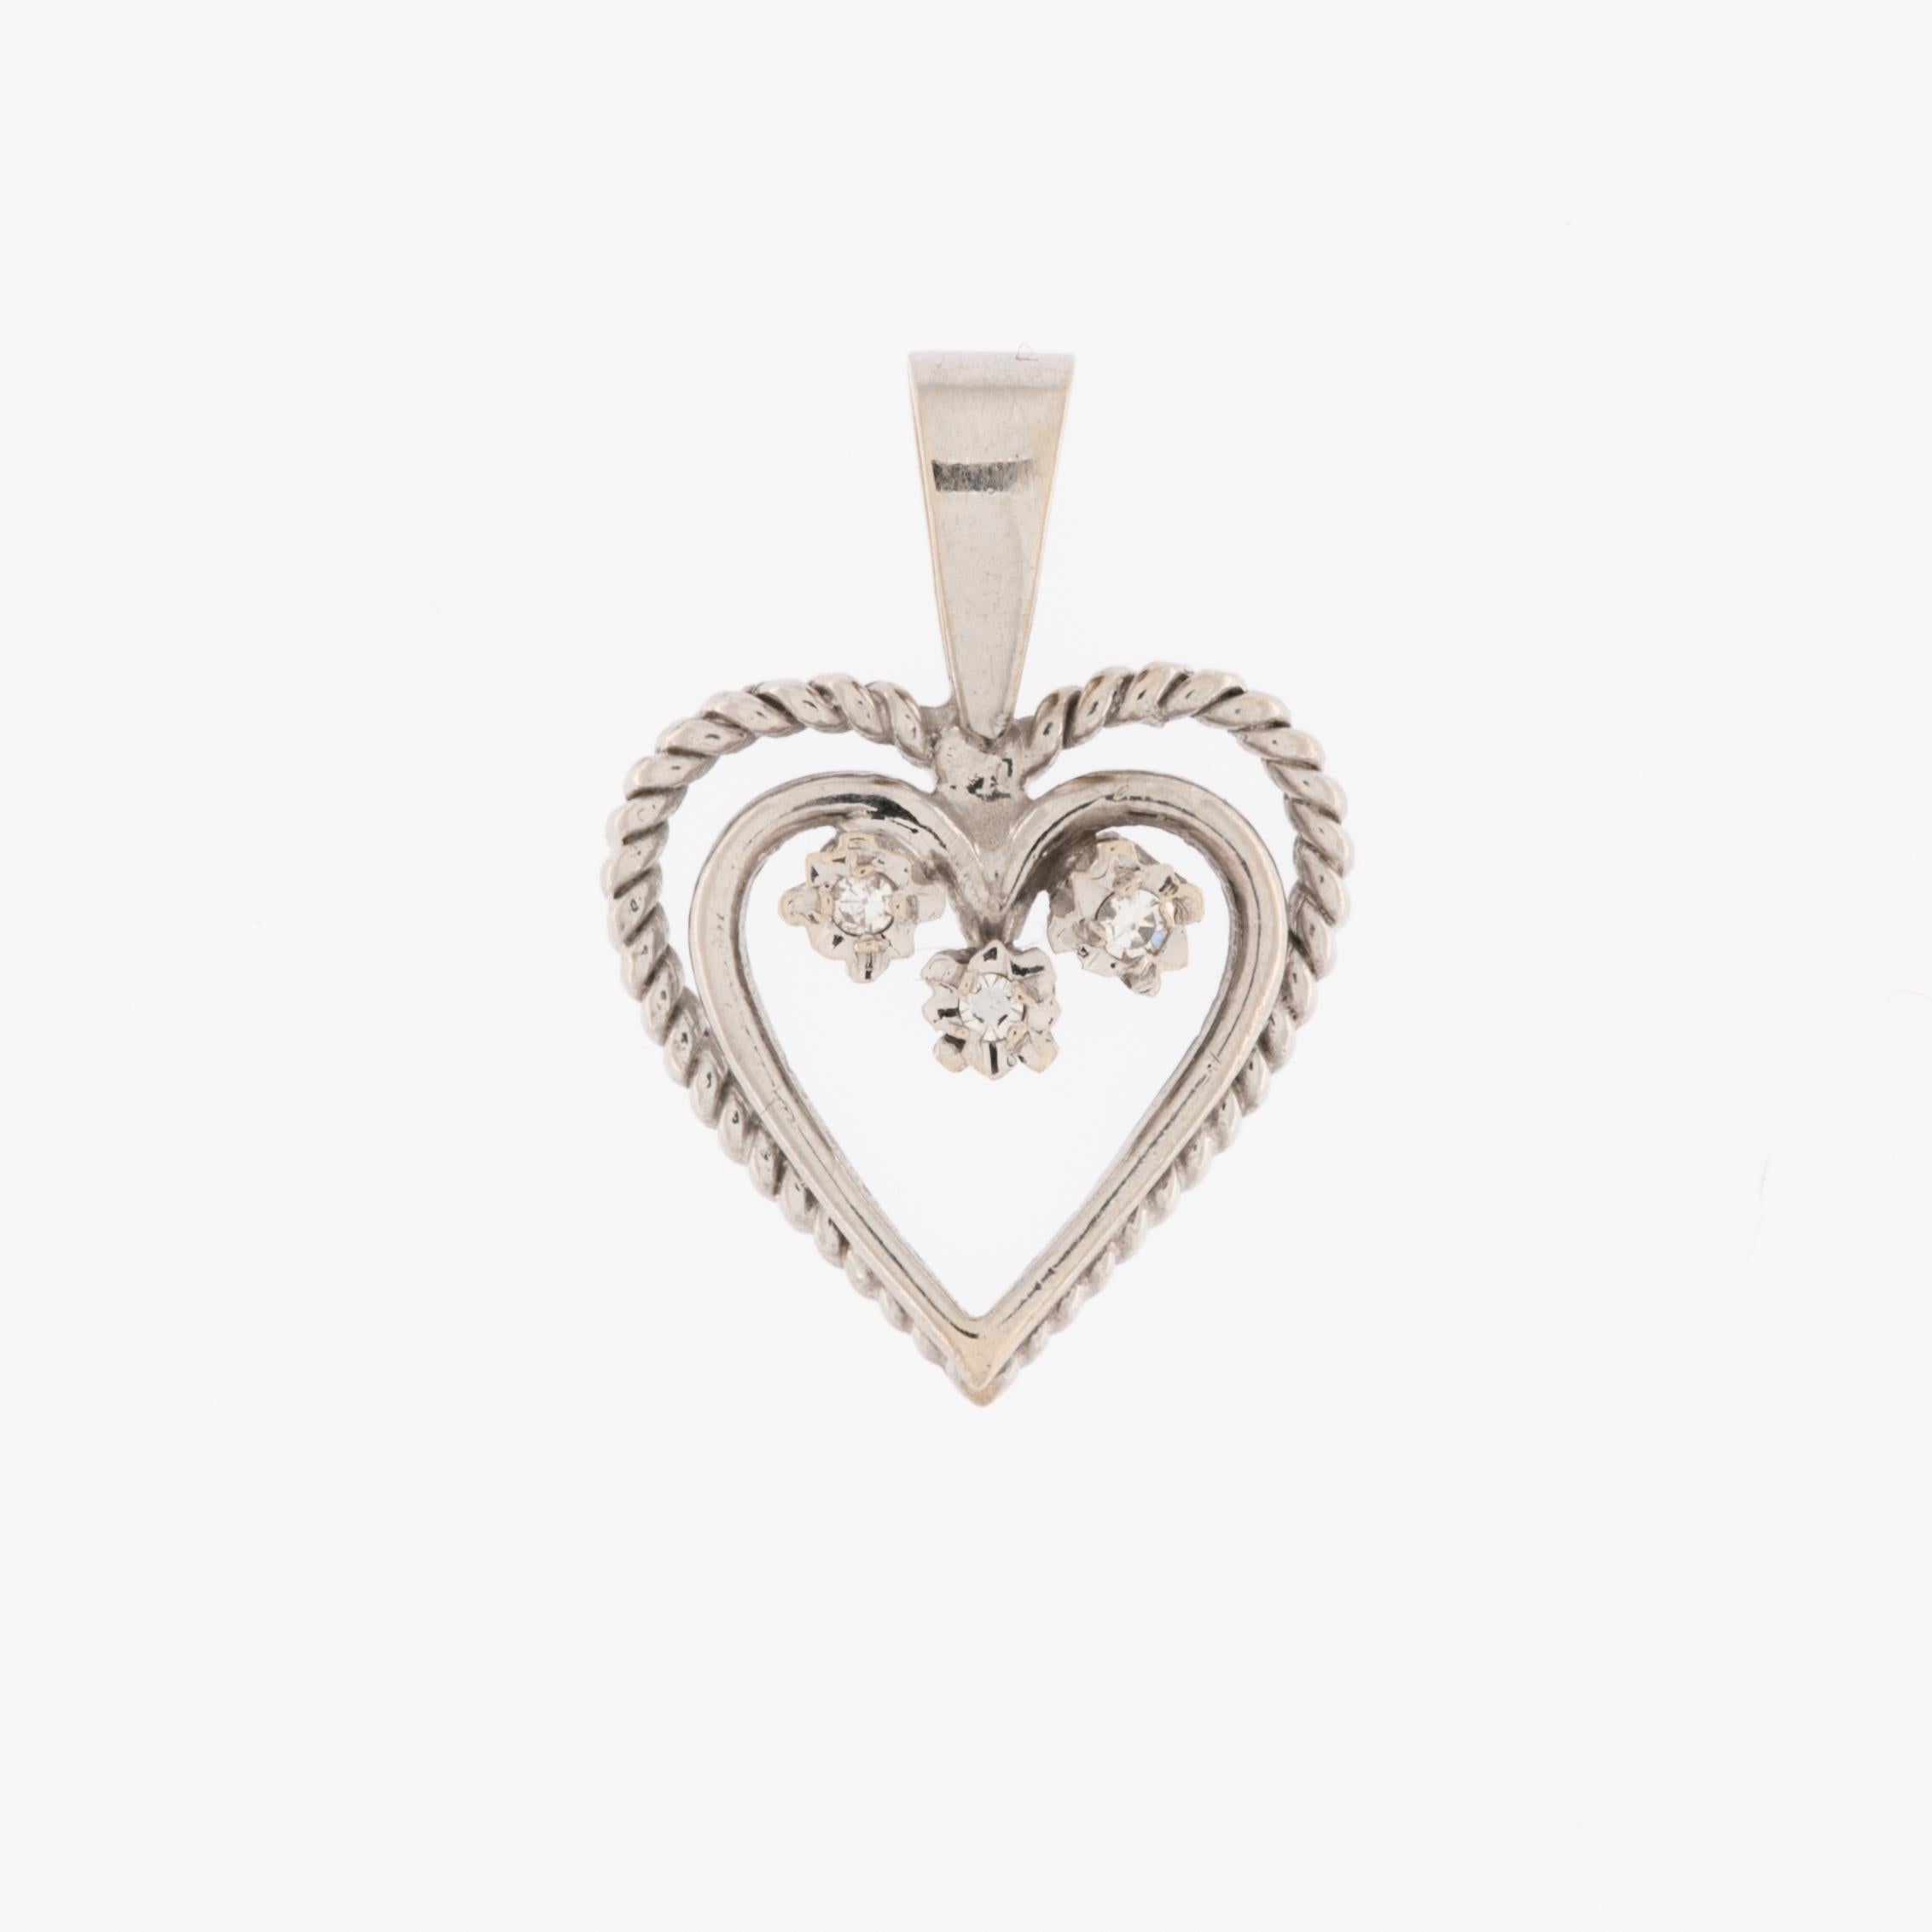 The Double Heart Pendant in White Gold with Diamonds is a romantic piece of jewelry that showcases intricate craftsmanship and elegance. Crafted from 18-karat white gold, this pendant features a unique design with two intertwined hearts, symbolizing